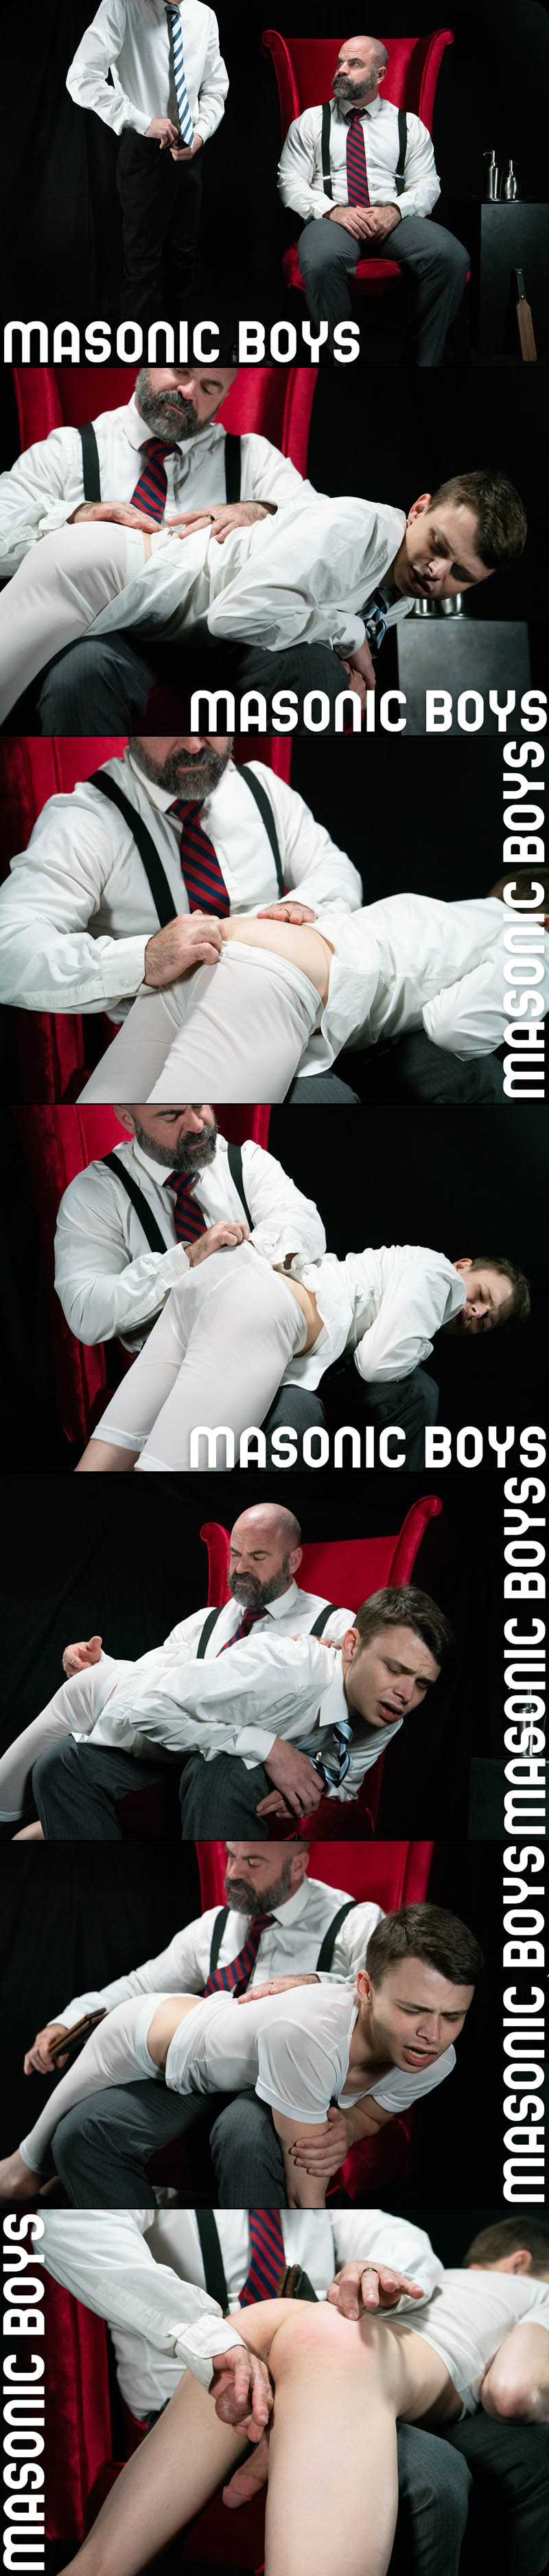 Bishop Angus and Austin Young CHAPTER 3: Disciplinary Action Apprentice Young at Masonic Boys